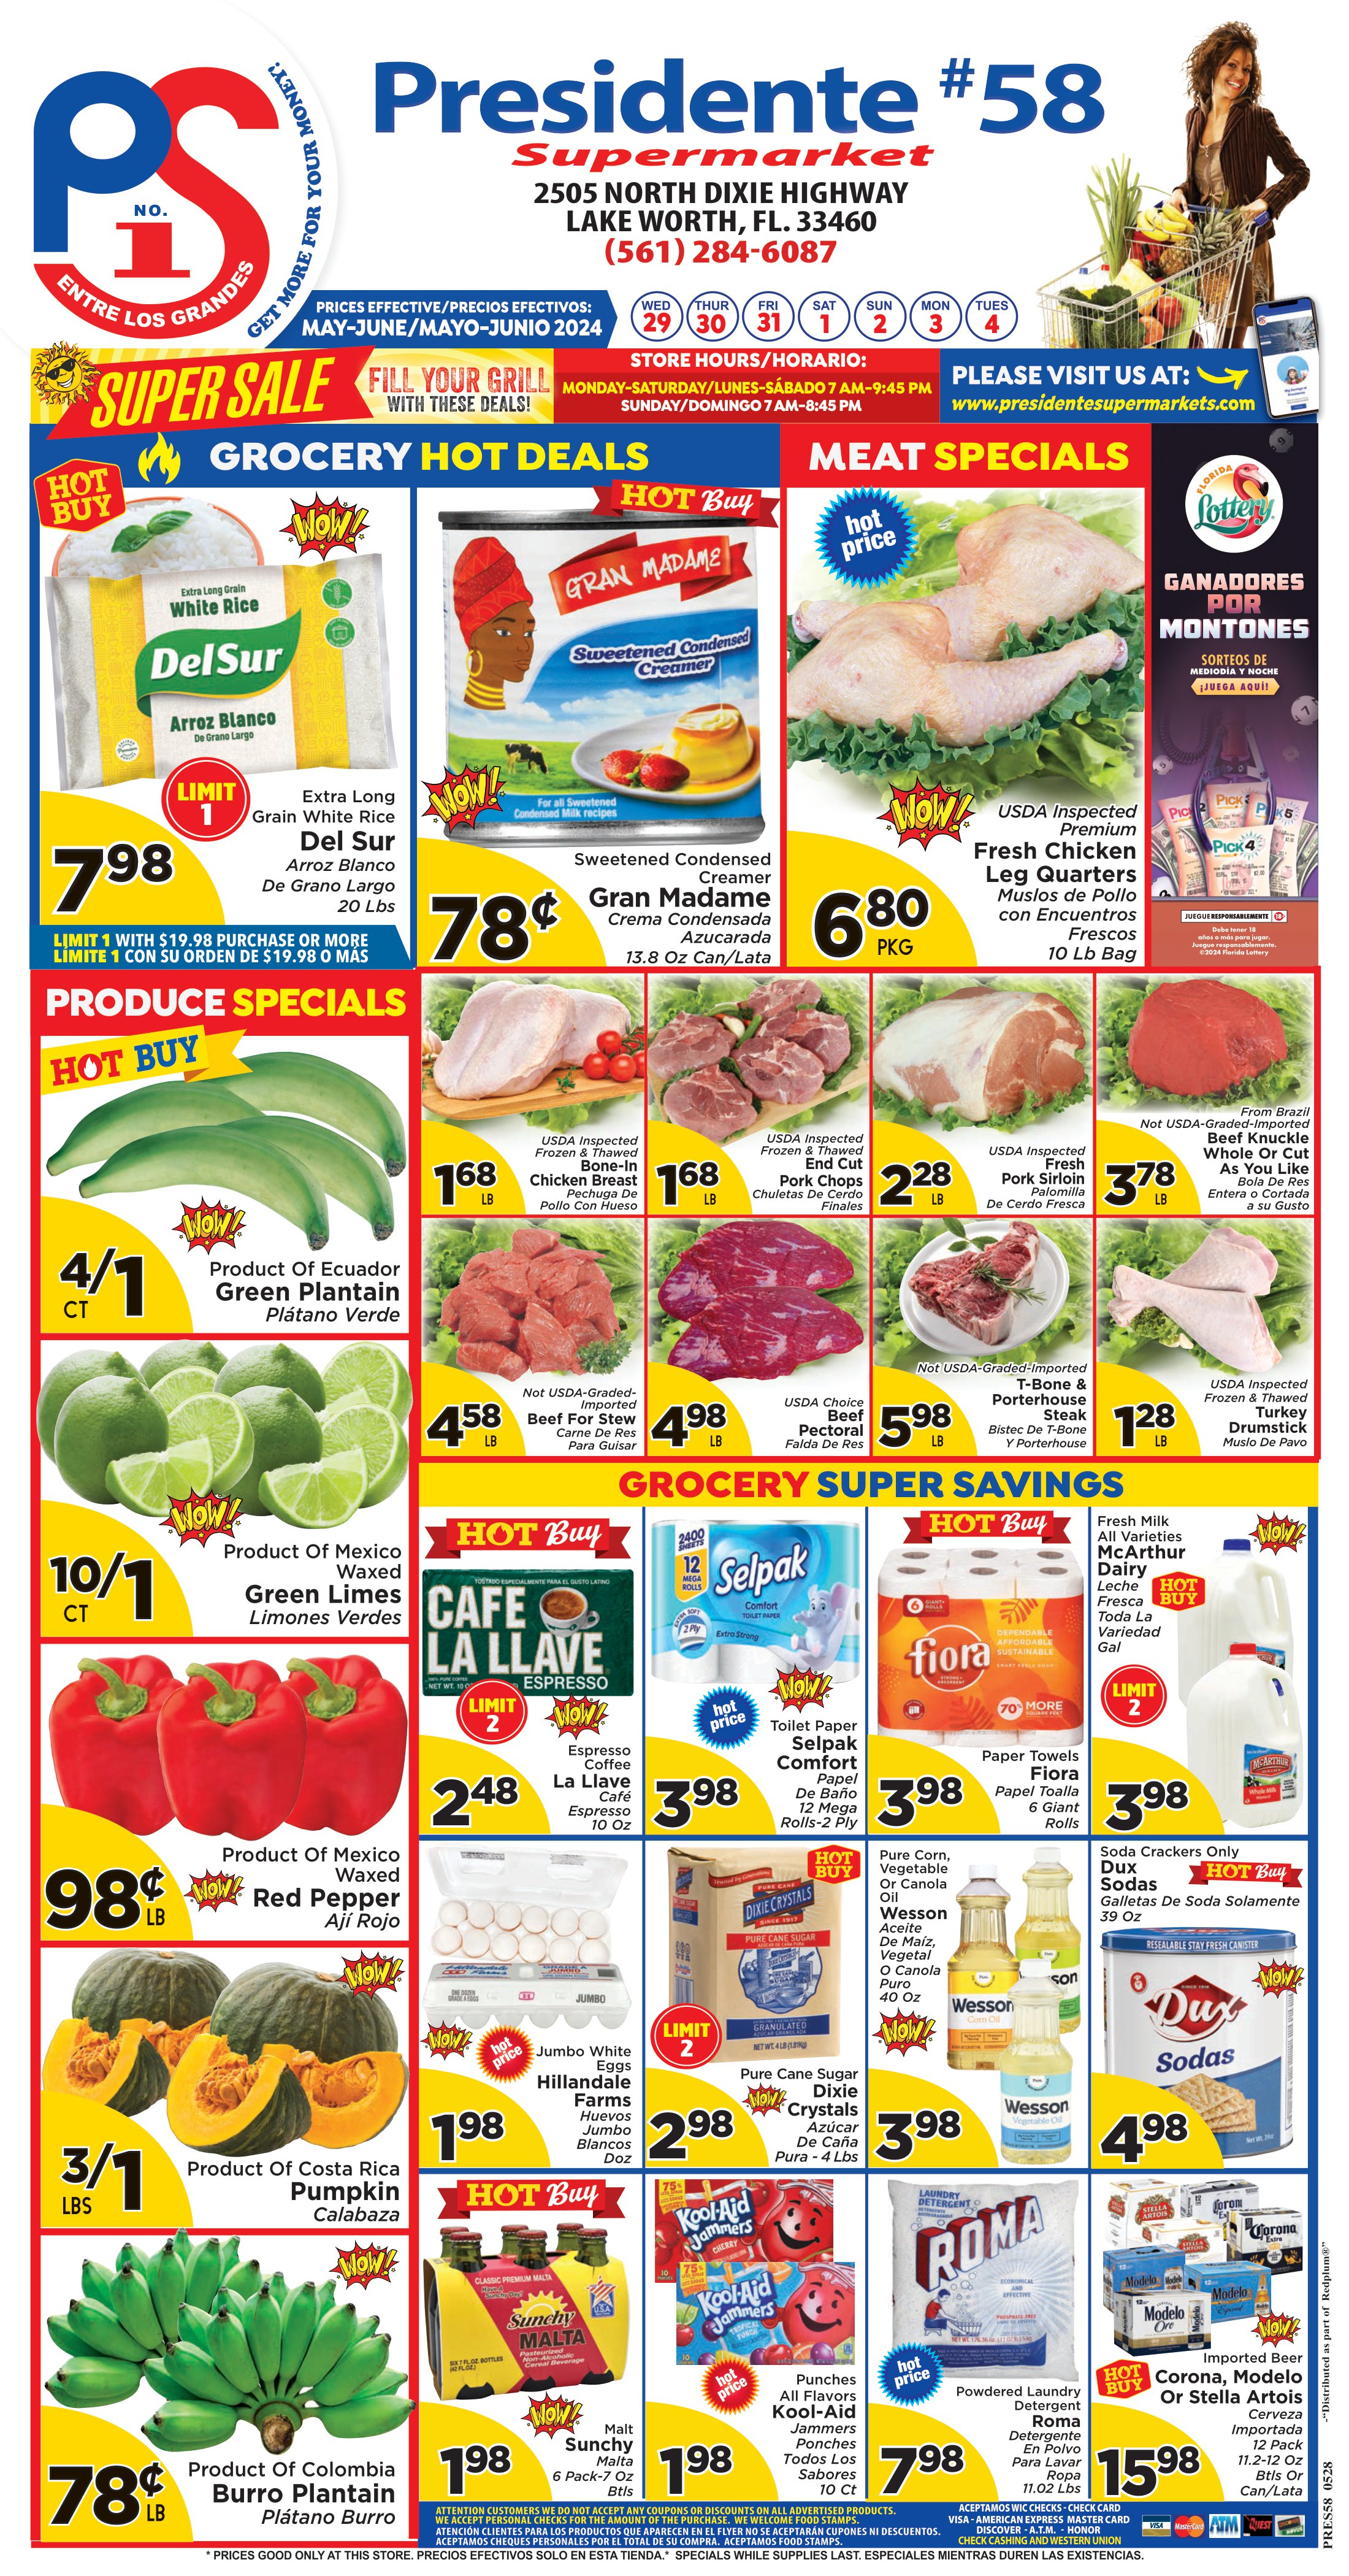 Presidente Supermarket - Weekly Promo for Store 58 - Page 1